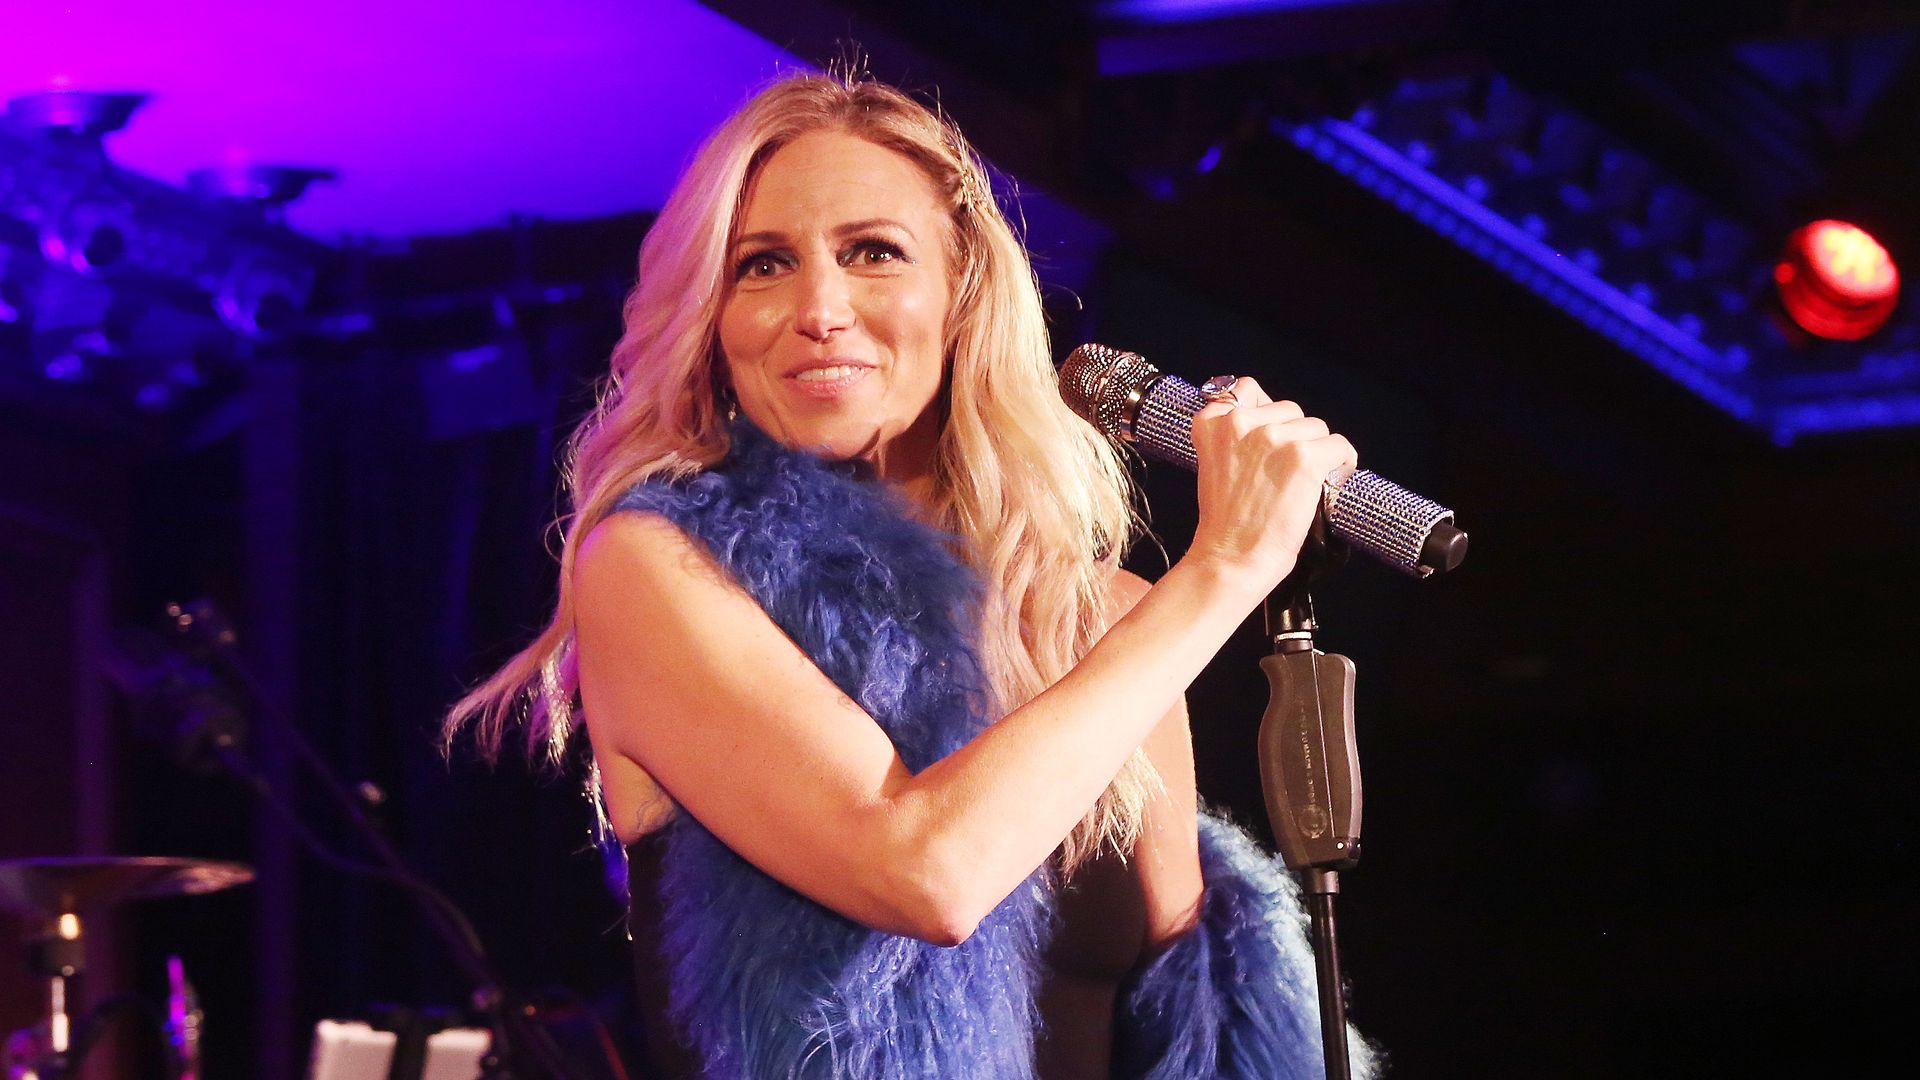 Debbie Gibson stands out in blue feather boa and holds the microphone